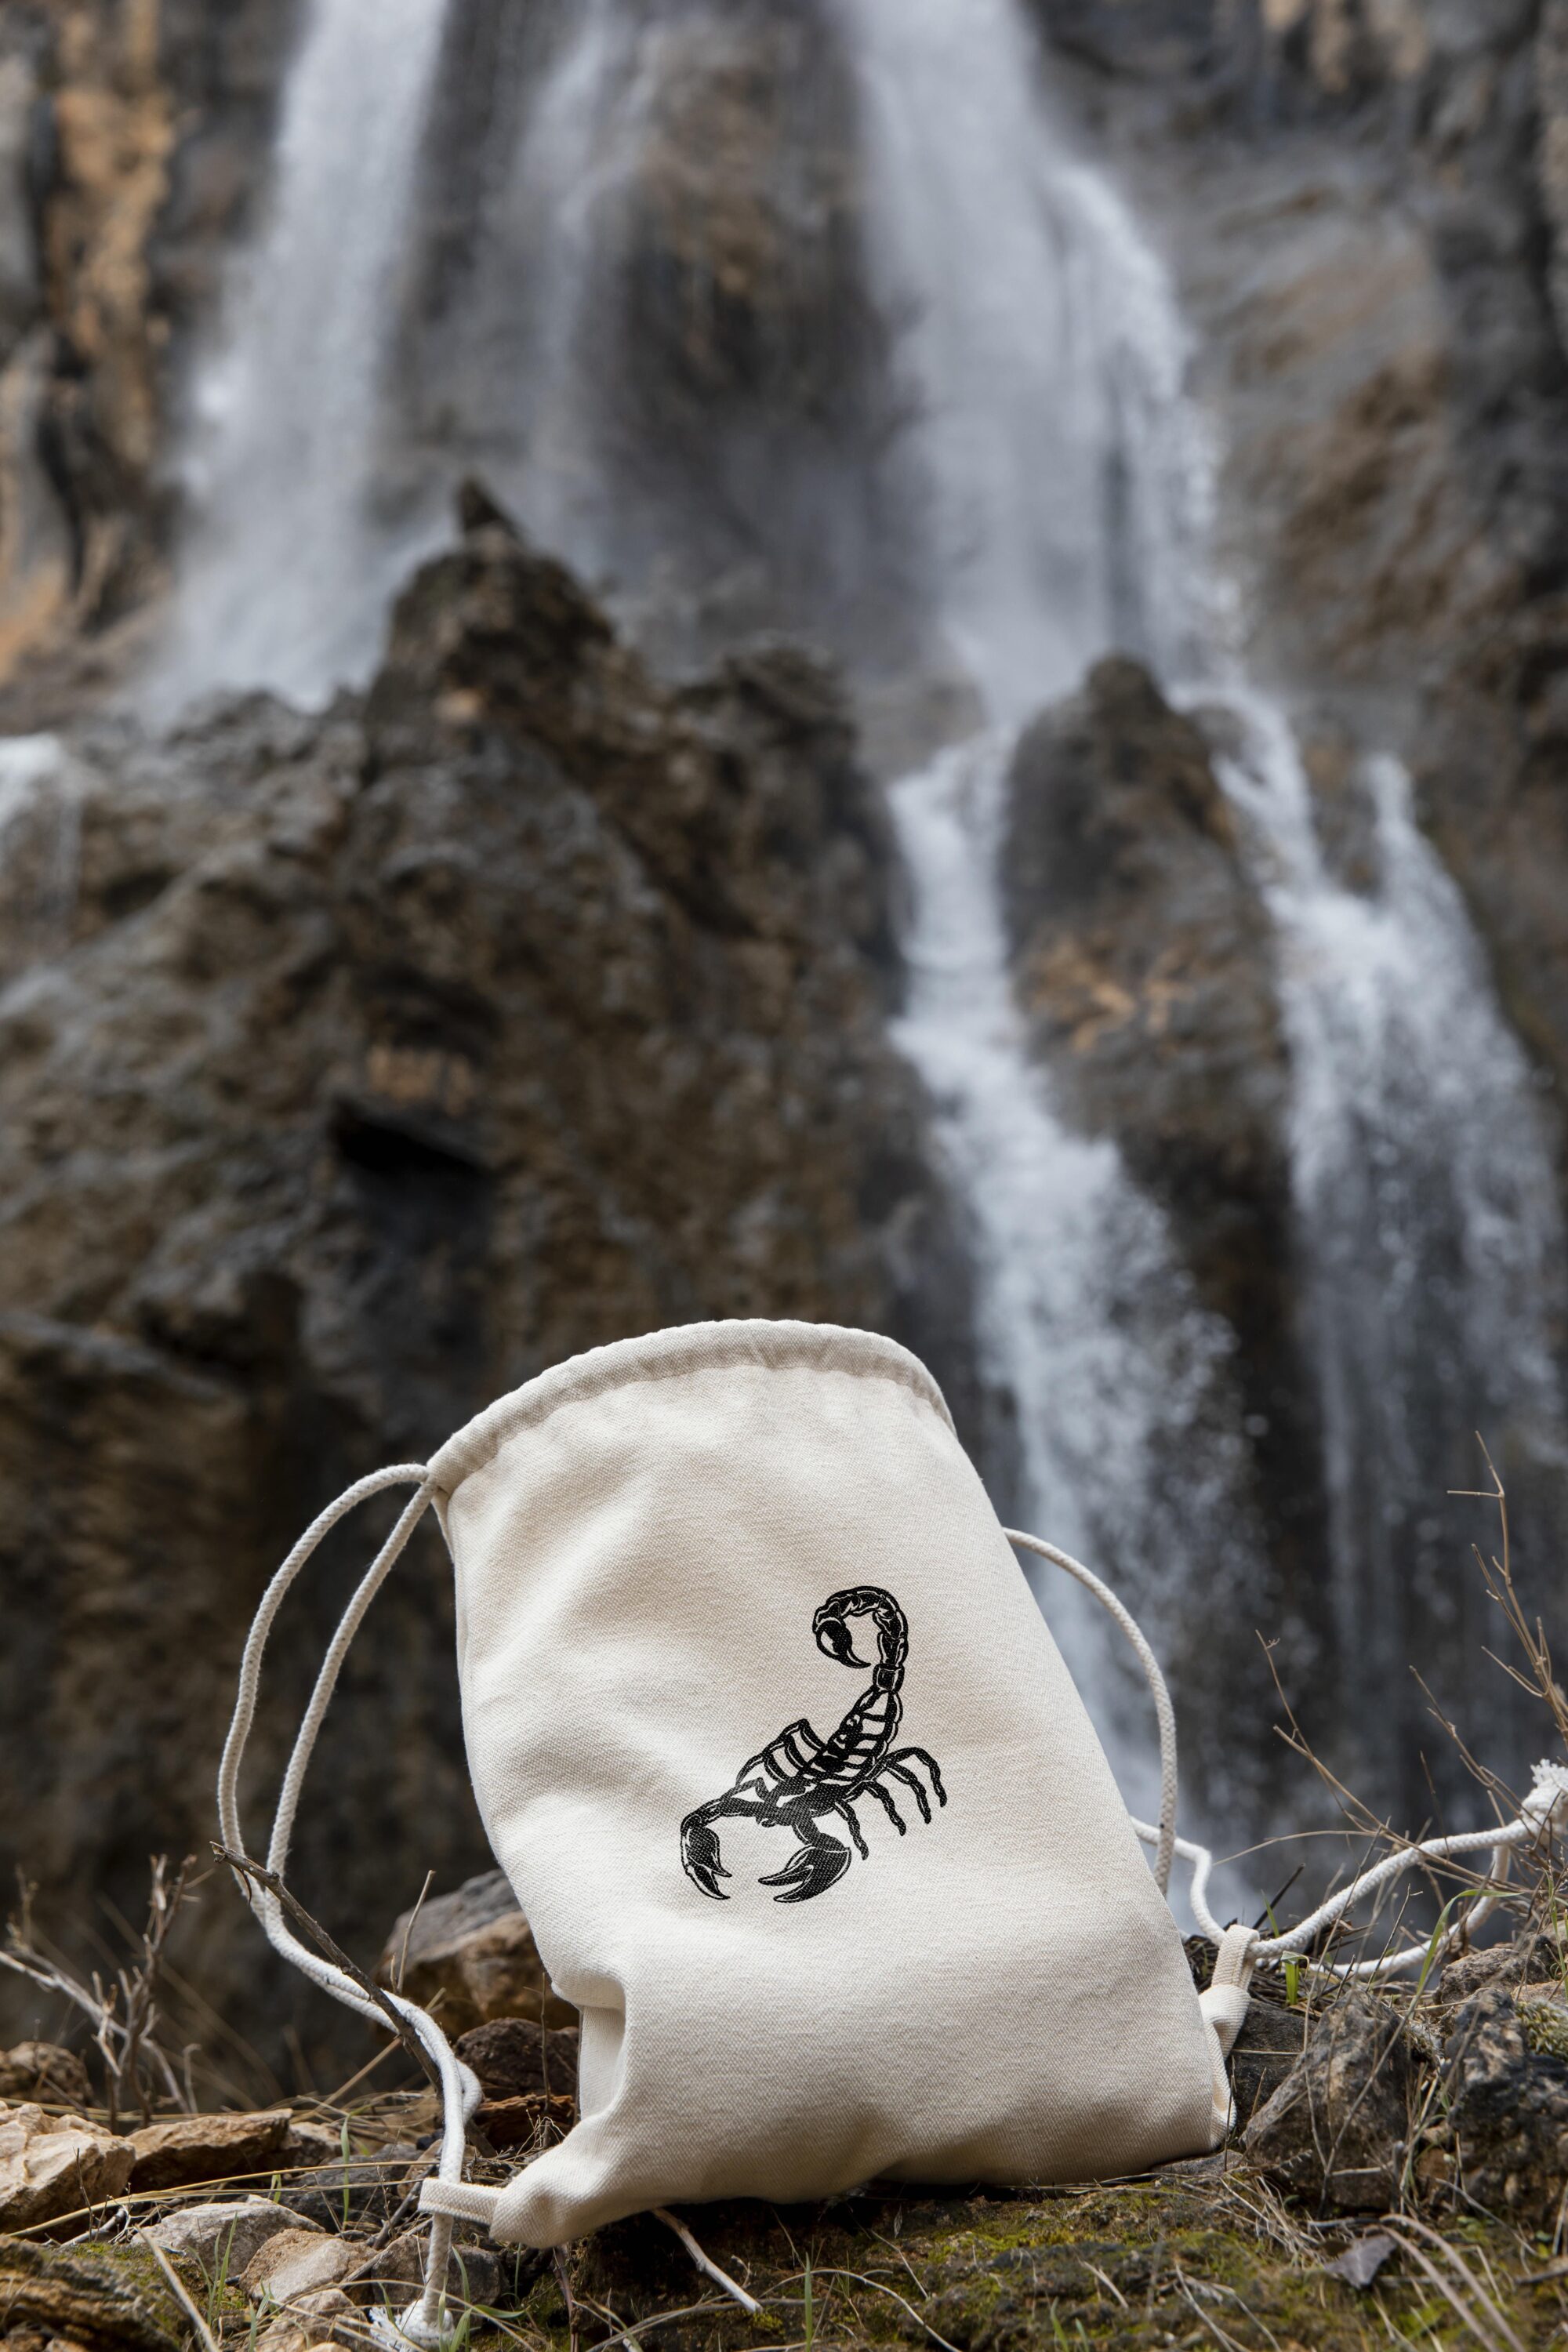 Bag sitting on the ground in front of a waterfall.